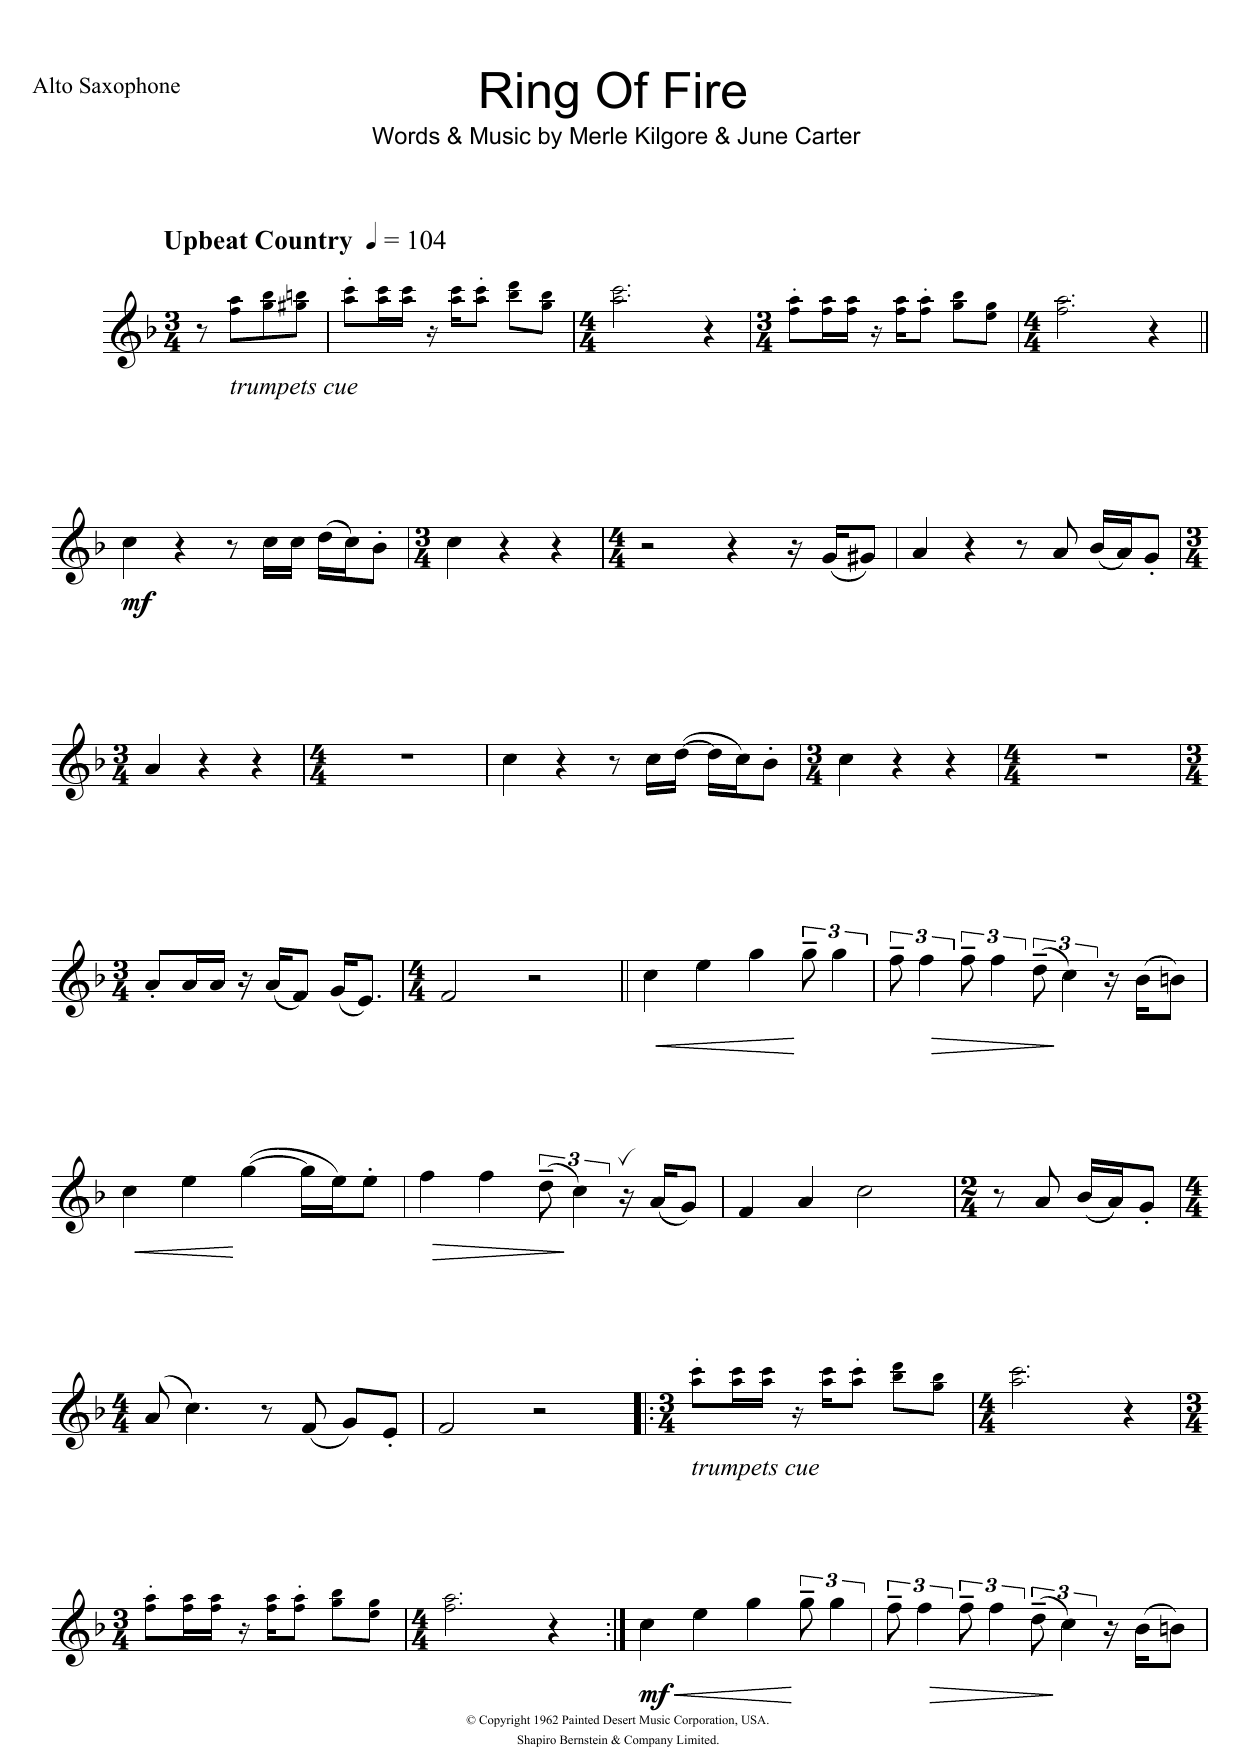 Download Johnny Cash Ring Of Fire Sheet Music